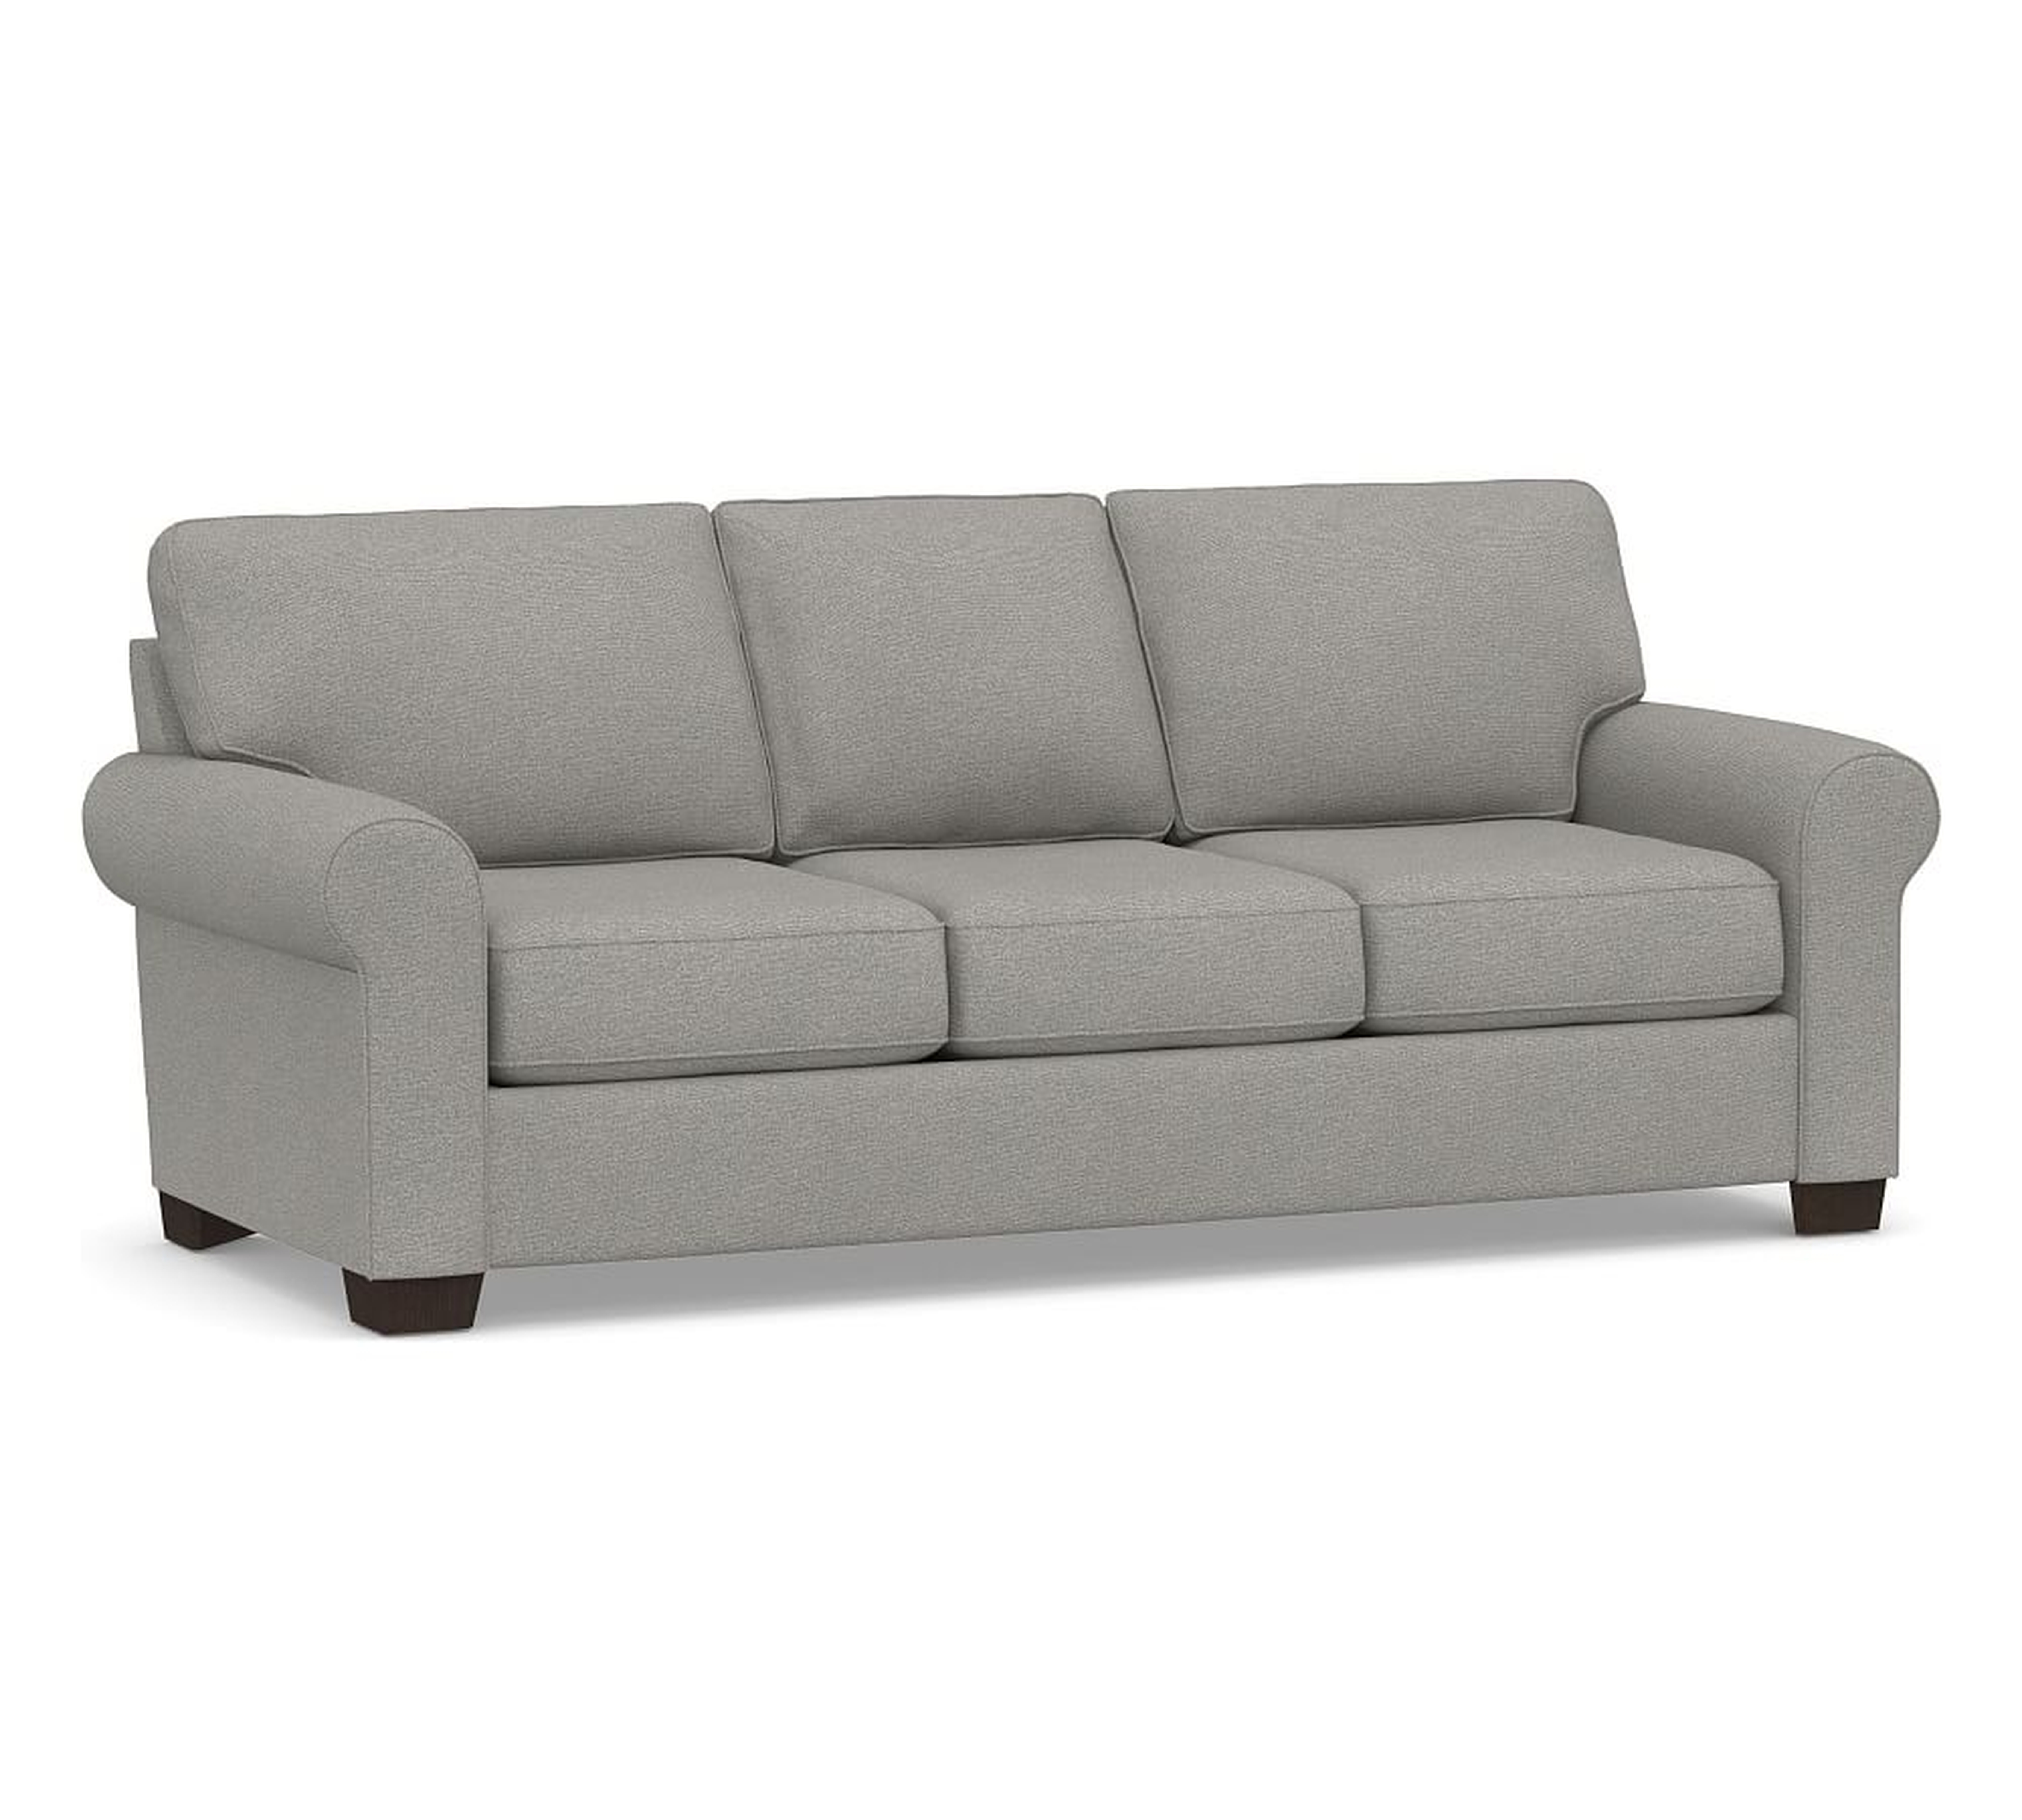 Buchanan Roll Arm Upholstered Sofa 87", Polyester Wrapped Cushions, Performance Heathered Basketweave Platinum - Pottery Barn